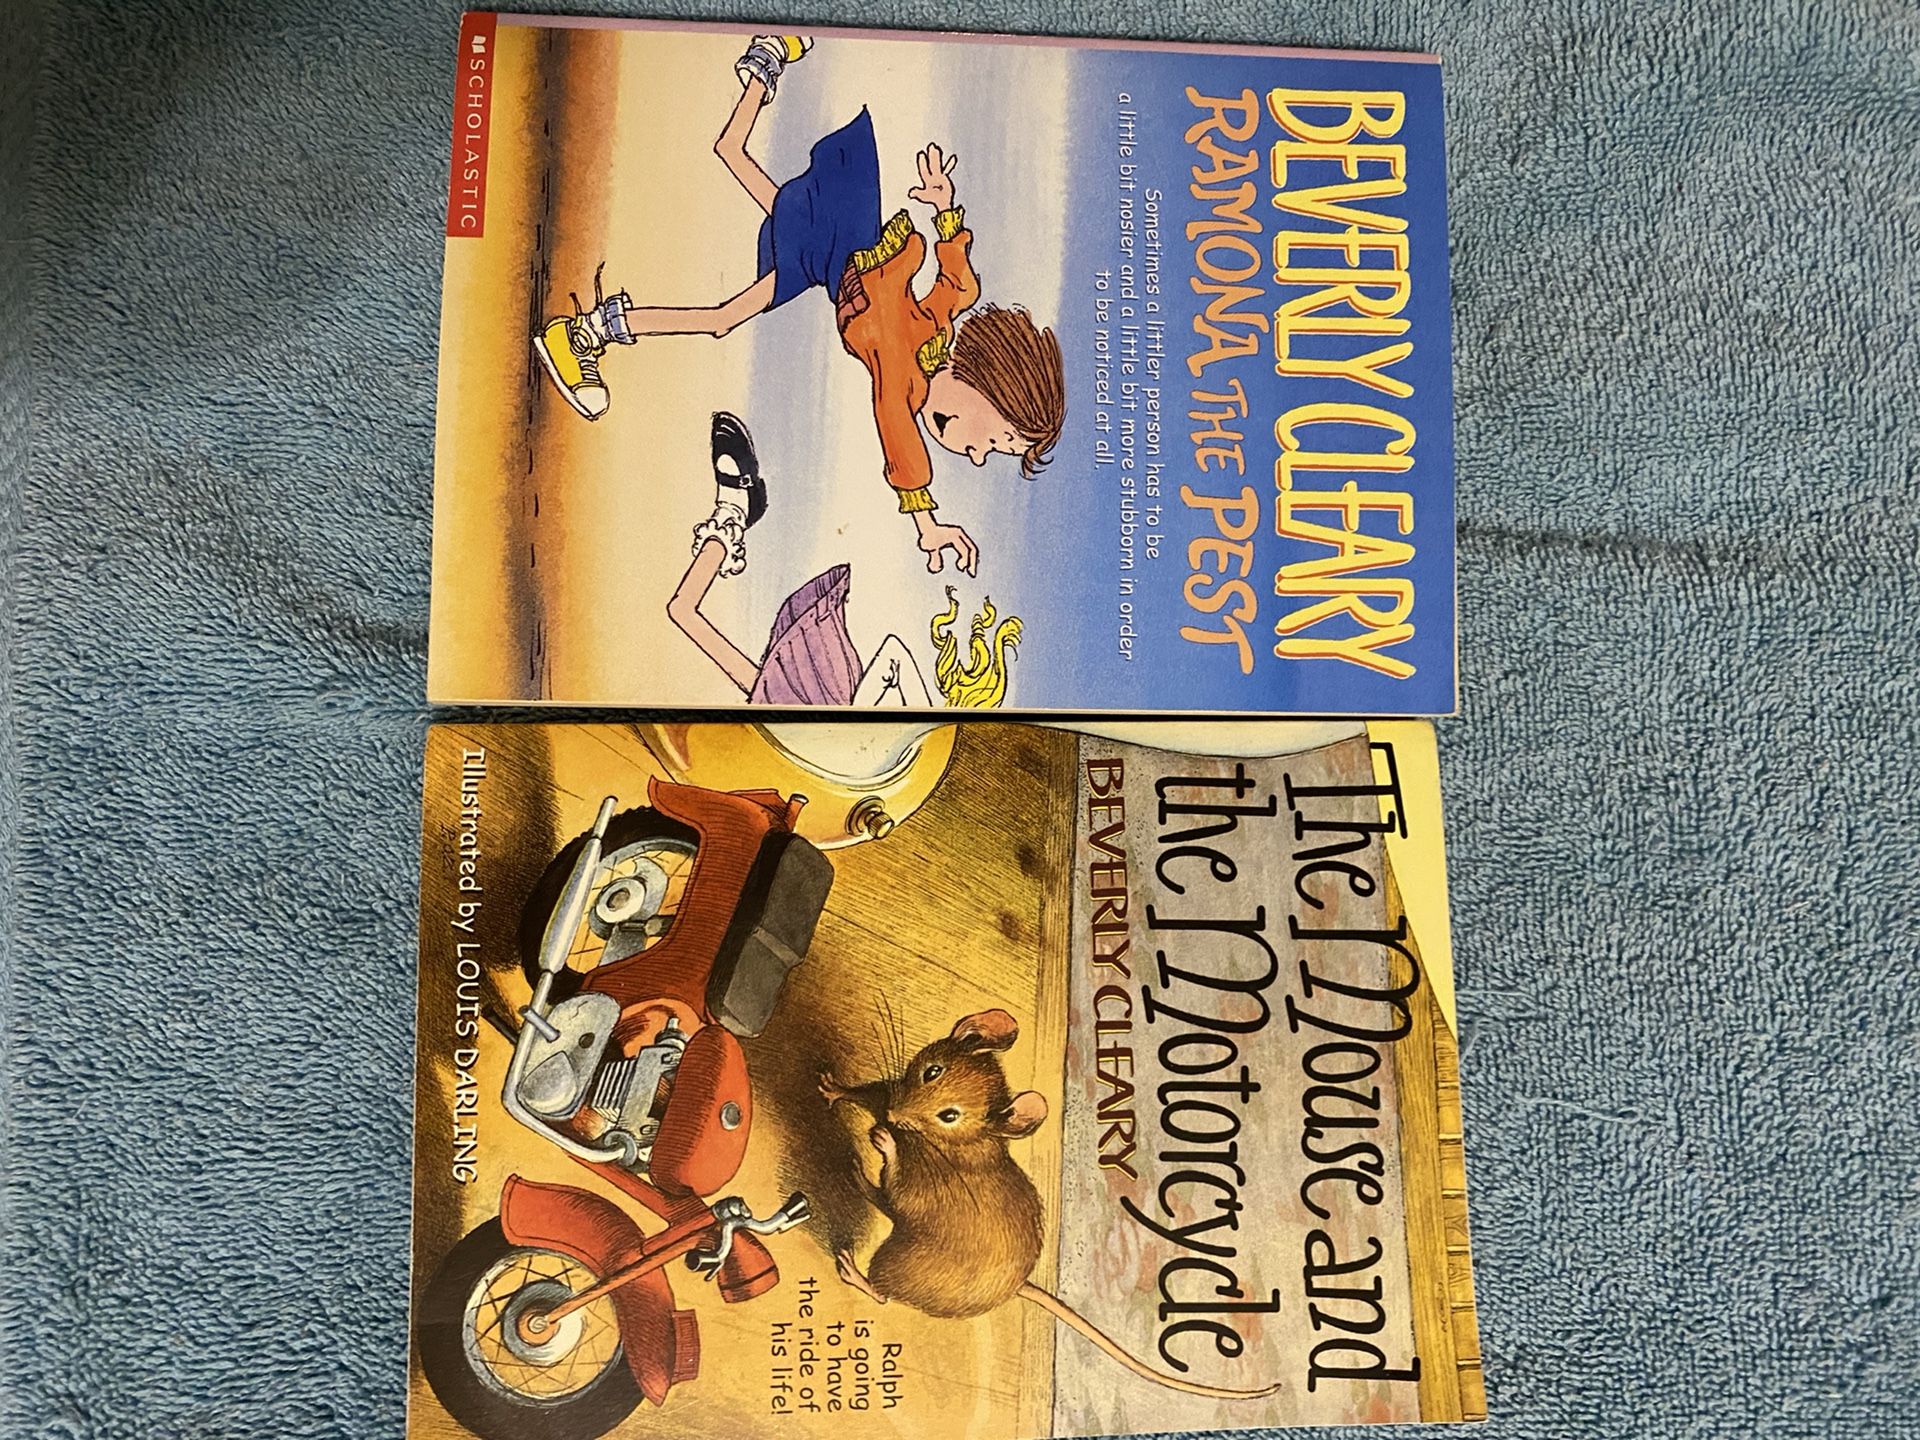 Two Beverly Cleary books